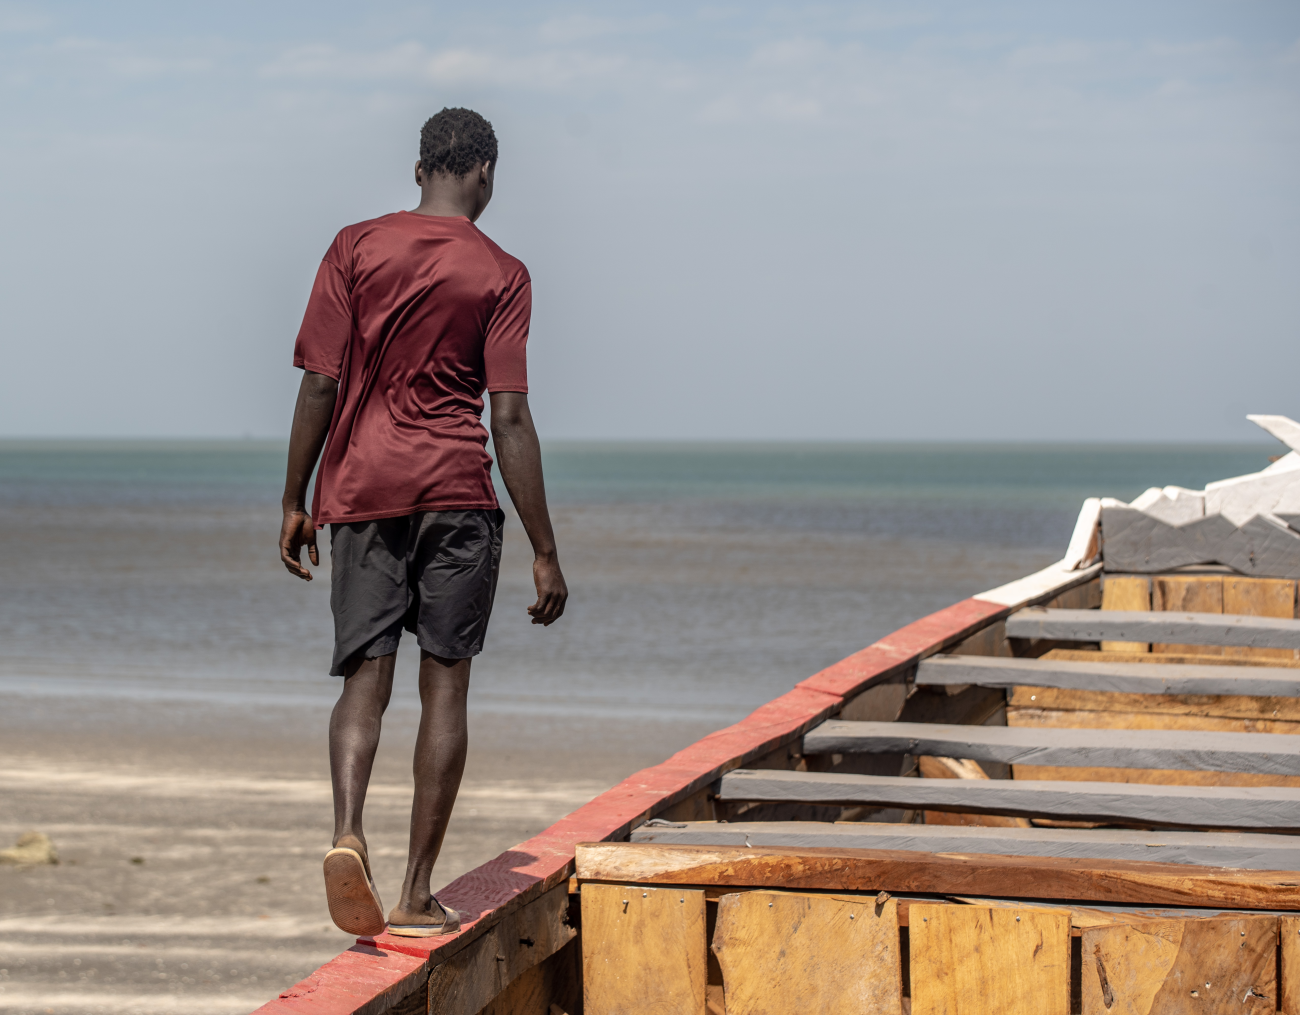 At 18, Sheikul departed The Gambia with the aim of reaching Europe. Today, he recounts the tragic journey that claimed the lives of at least 62 Gambians. 